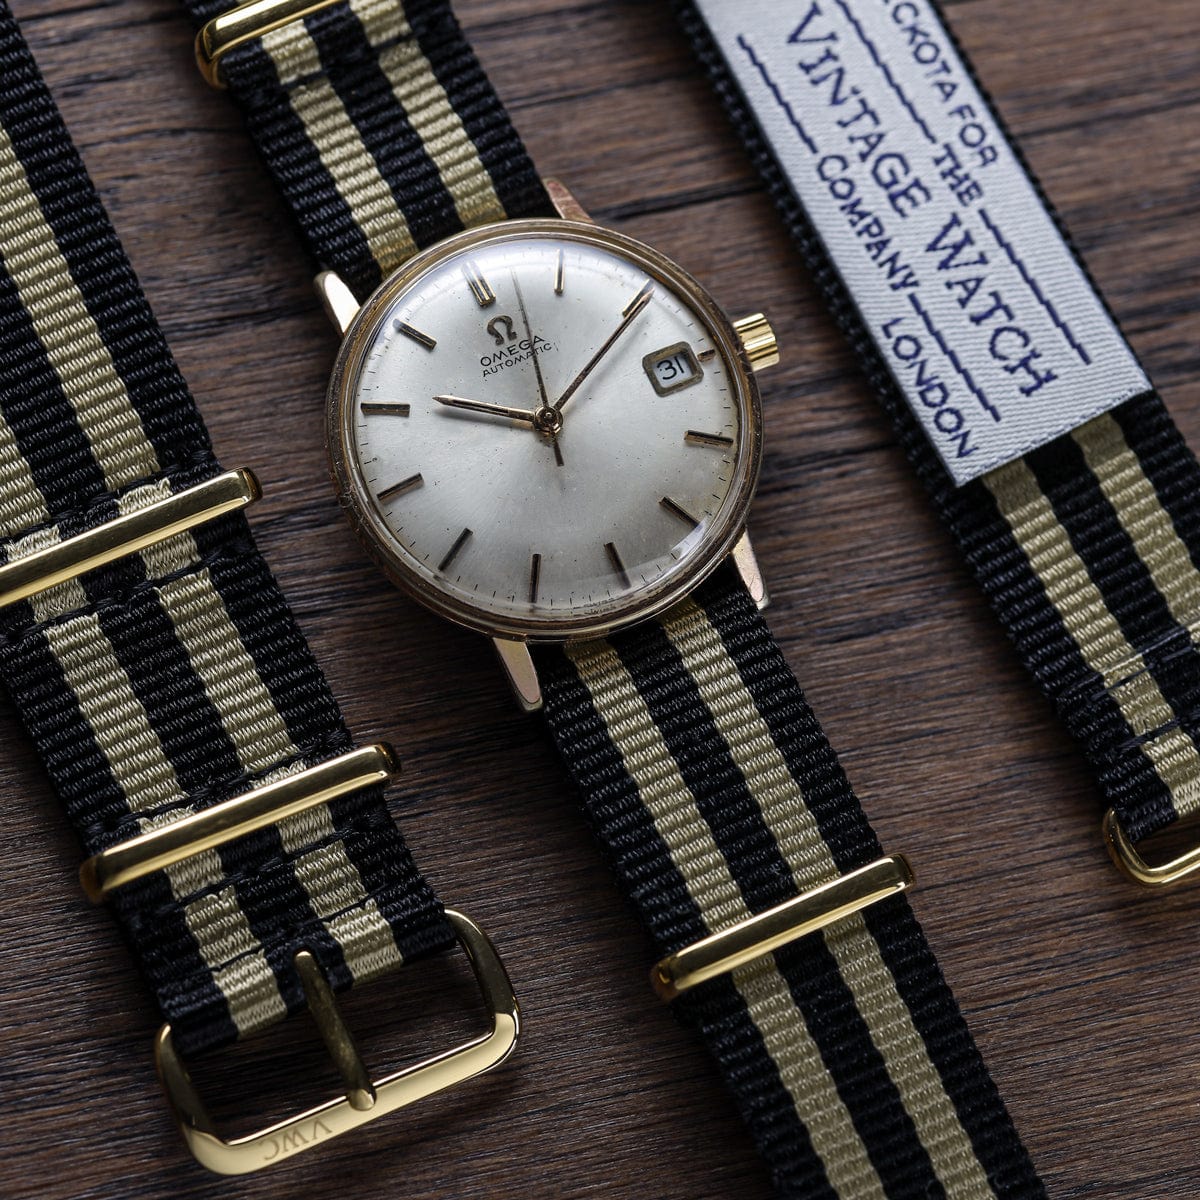 The Vintage Watch Company Military Watch Strap - Black & Gold / Gold